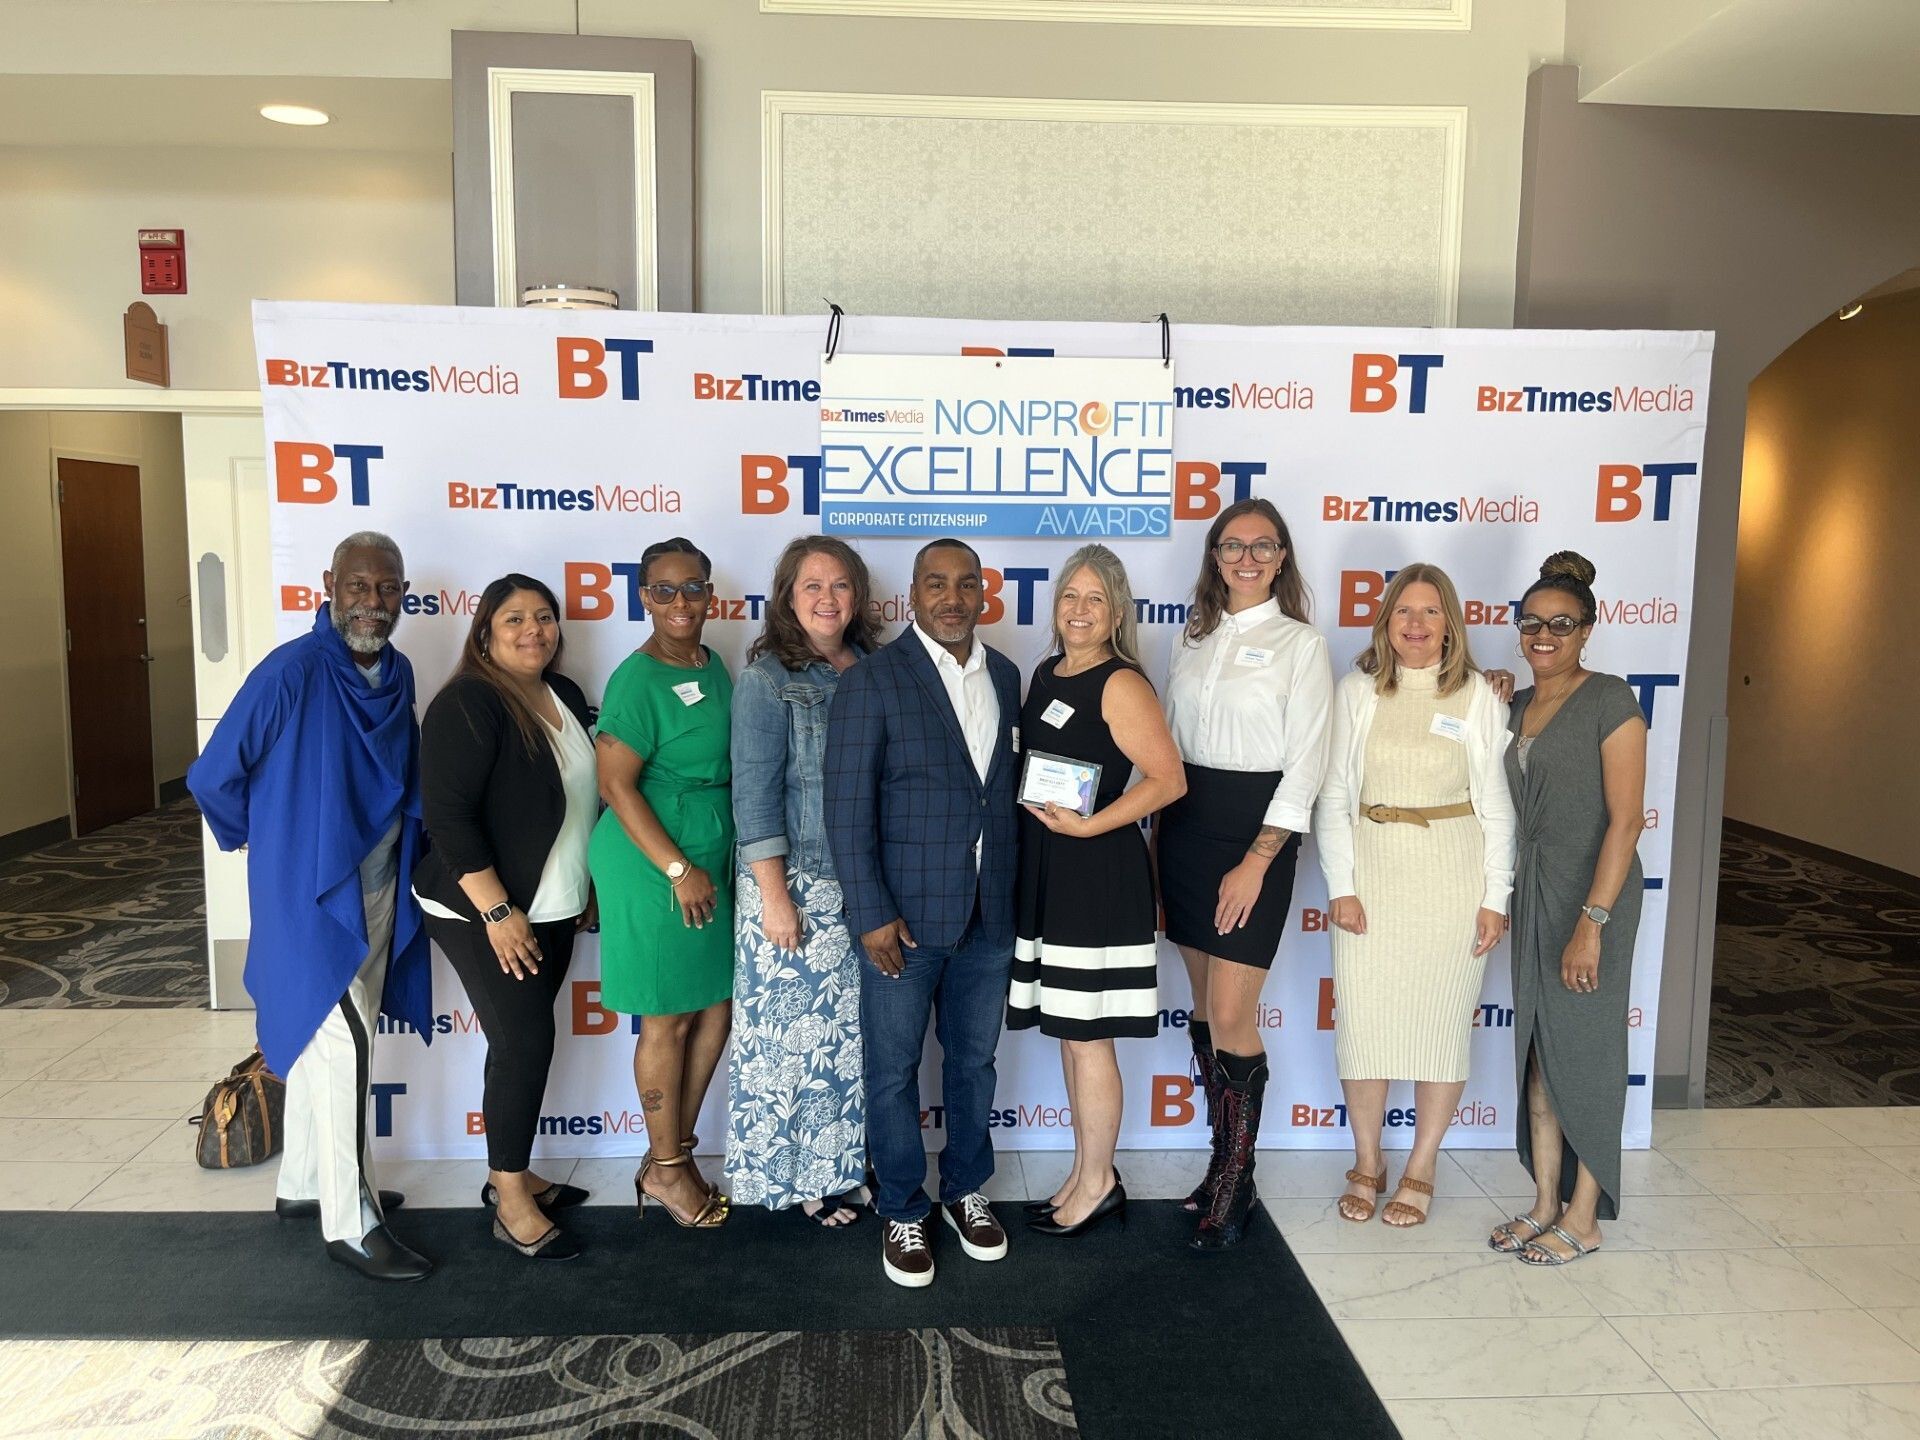 The Community Advocates team poses for a picture in front of BizTimes Media's Nonprofit Excellence Awards banner. Amongst them is Andi Elliott, finalist for the the Nonprofit Executive of the Year award. 